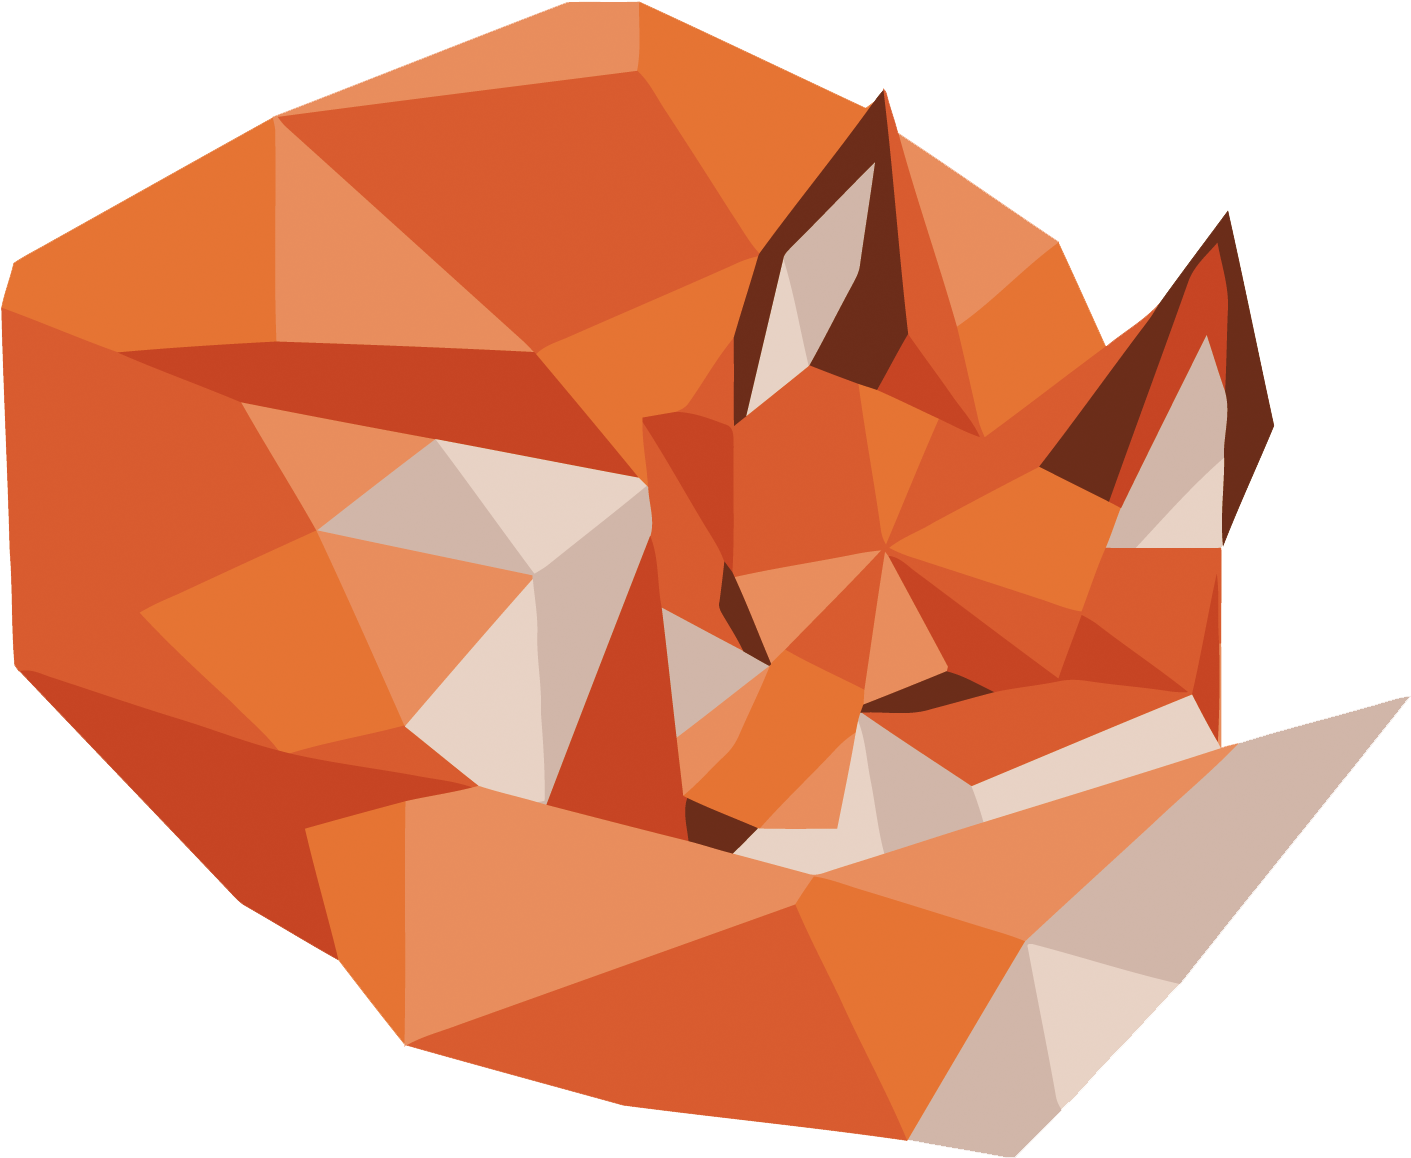 Low Poly Fox Behance Illustration - Low Poly Fox Png (1874x1500)